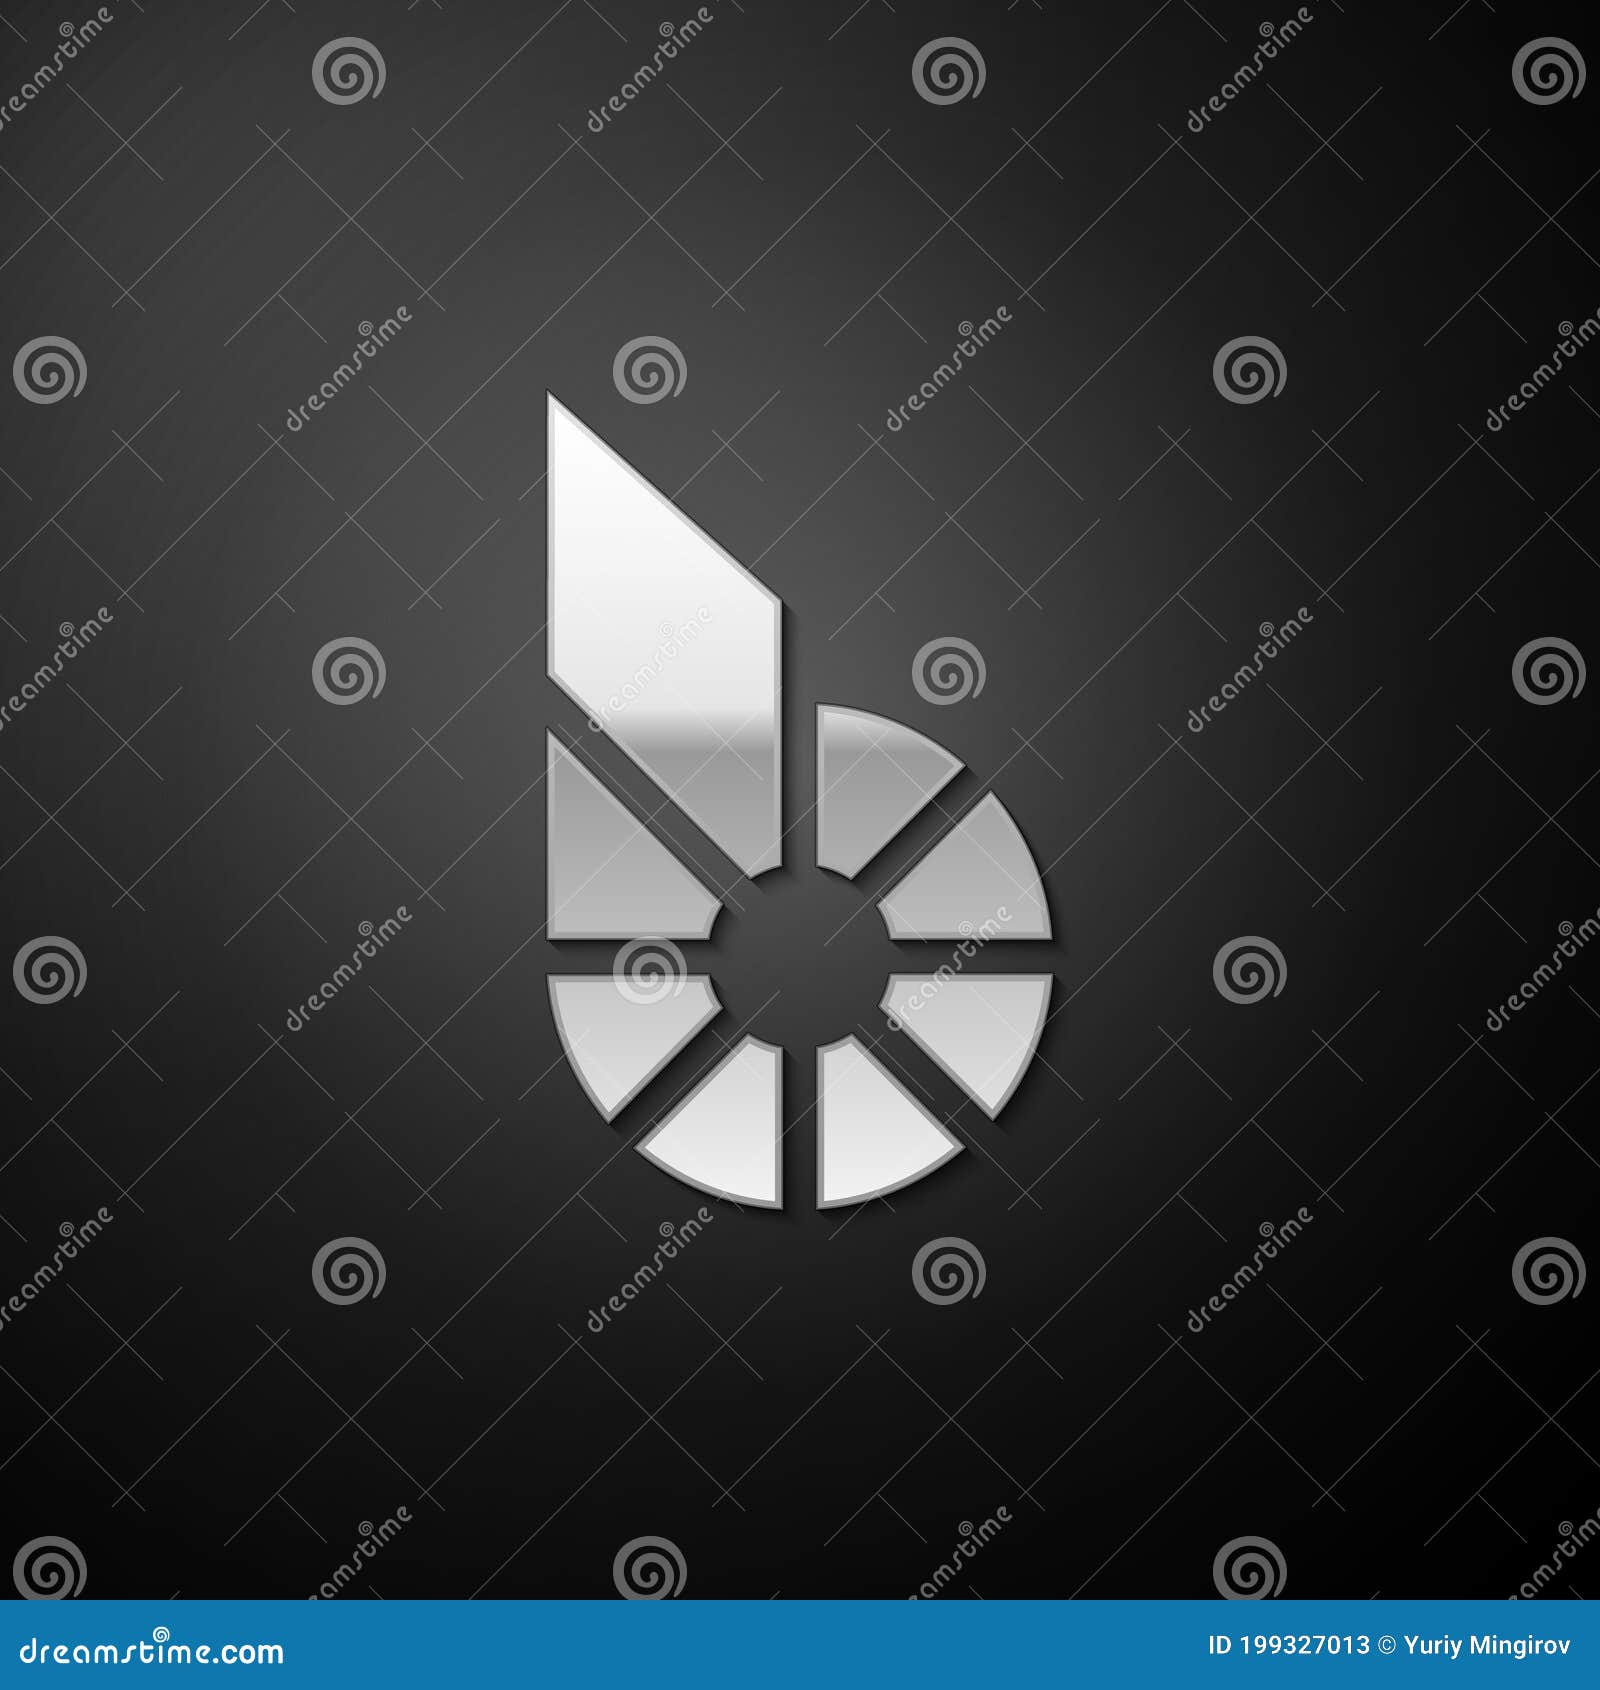 Silver Cryptocurrency Coin Bitshares BTS Icon Isolated On ...